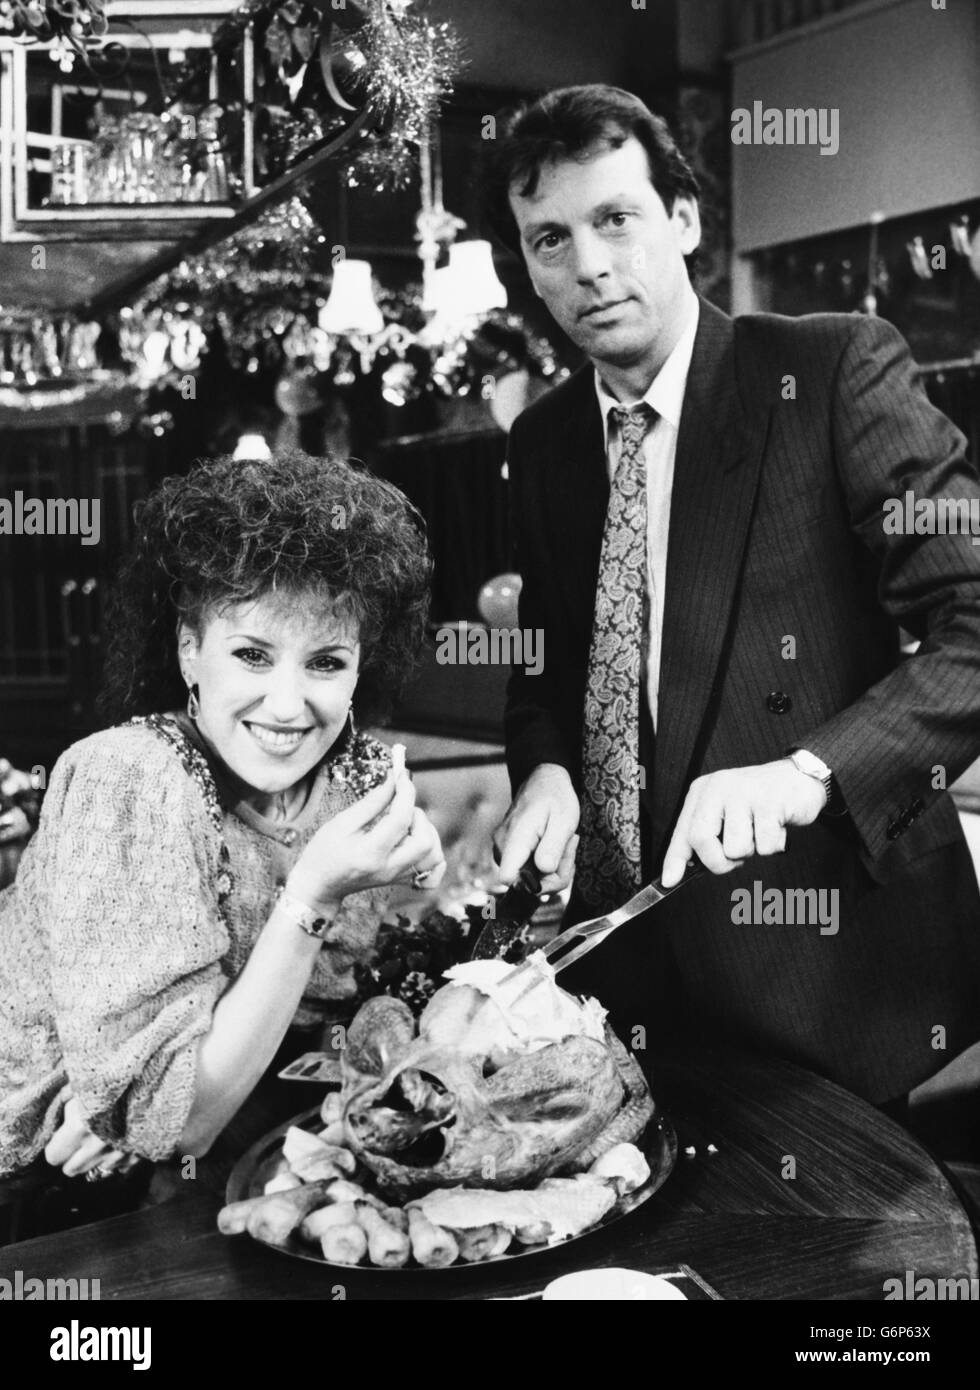 Leslie Grantham as Den Watts and Anita Dobson as Angie promote the Christmas episodes of EastEnders. Stock Photo